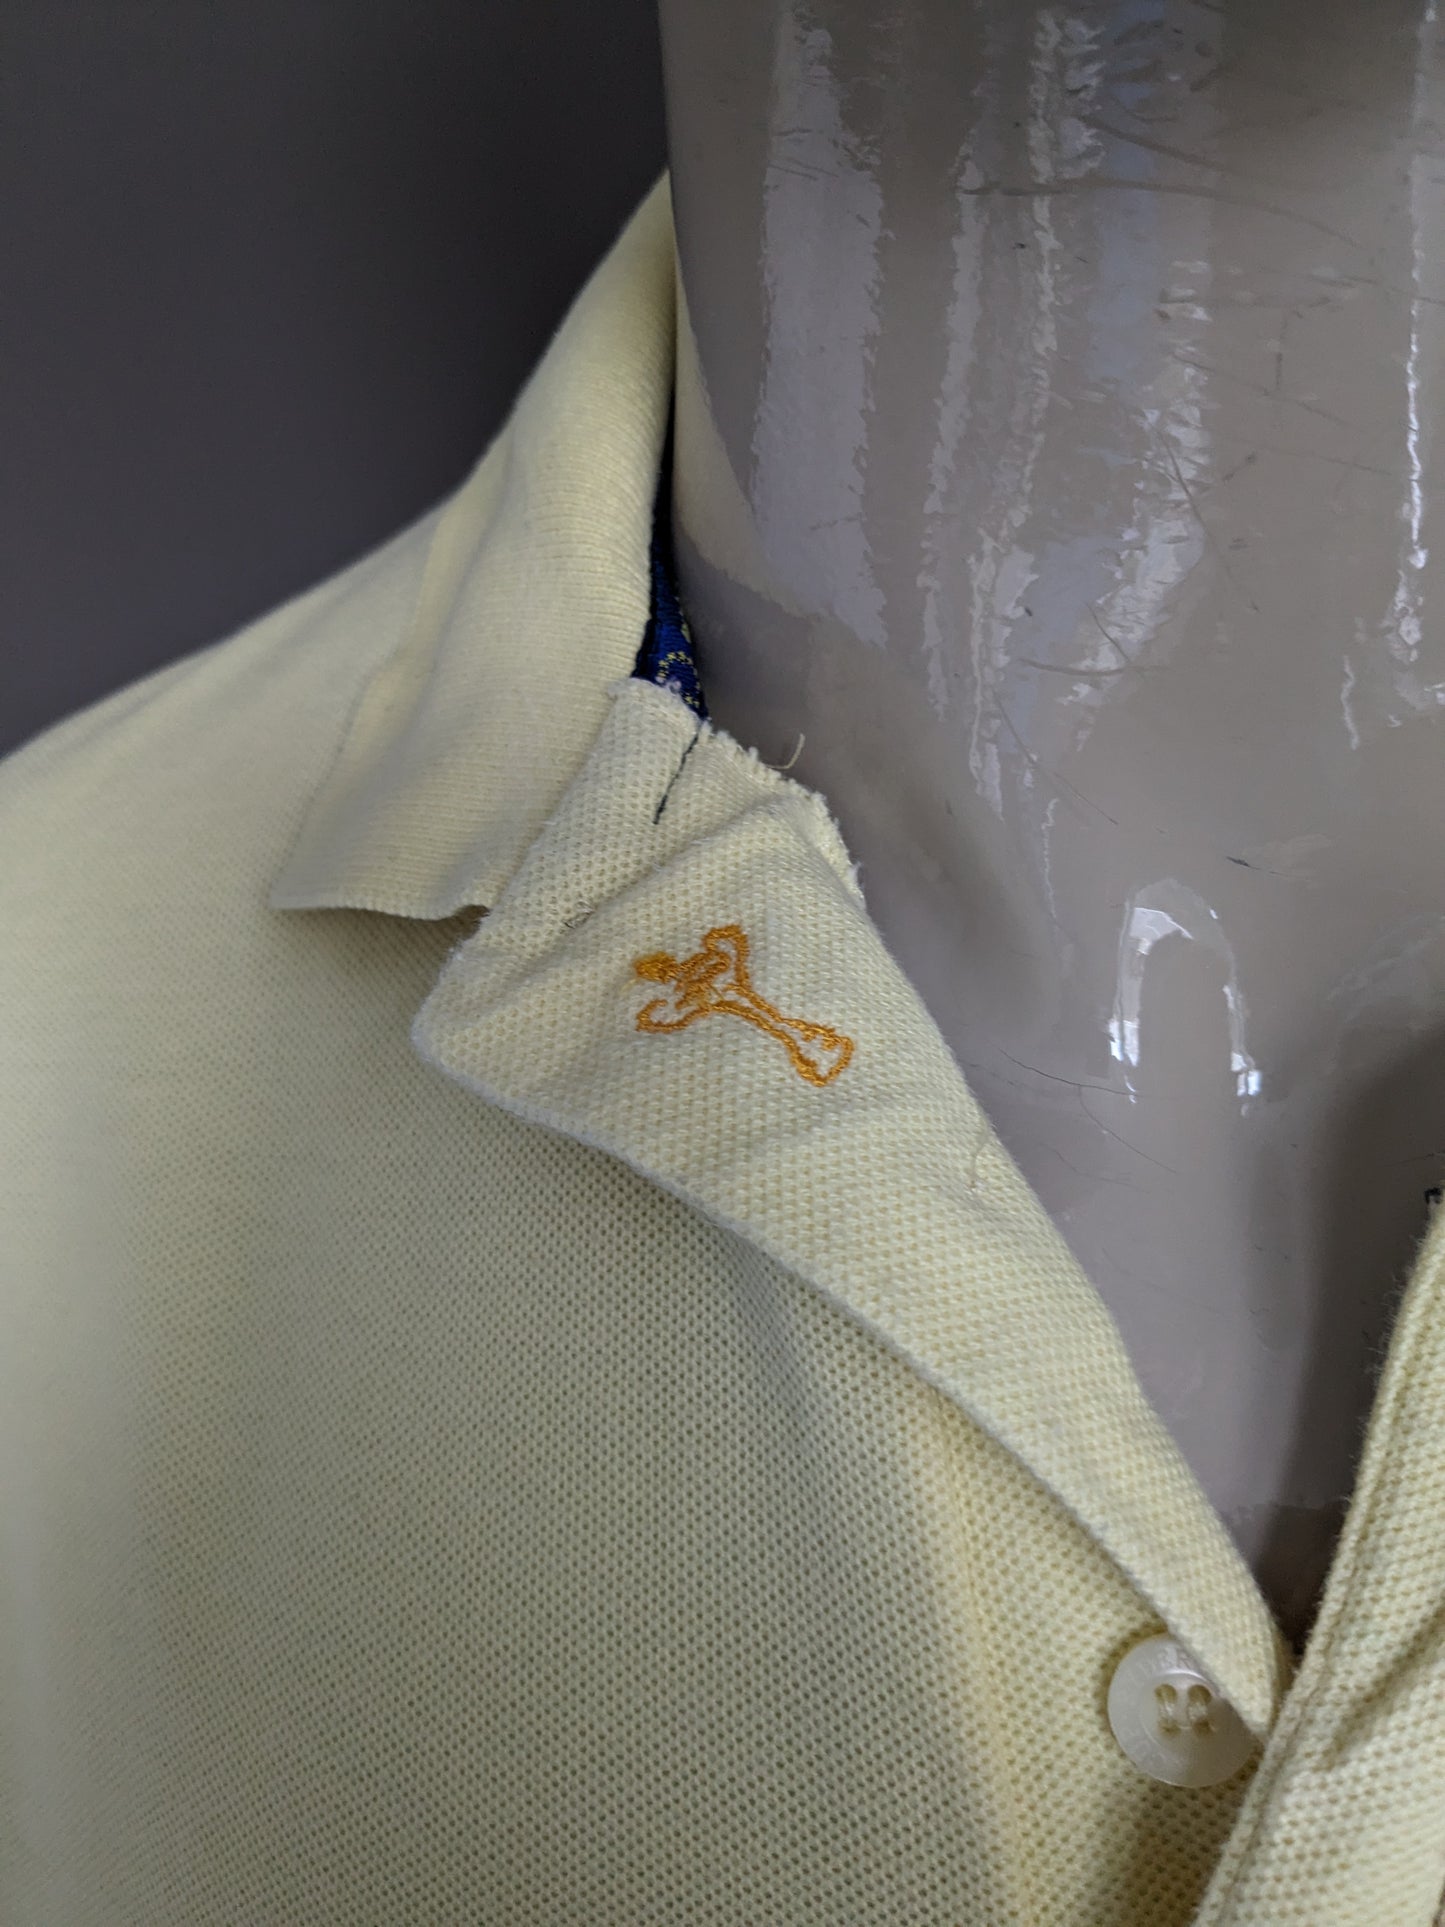 Vintage Glenmuir "Ryder Cup 97" Polo. Couleur jaune clair. Taille L.